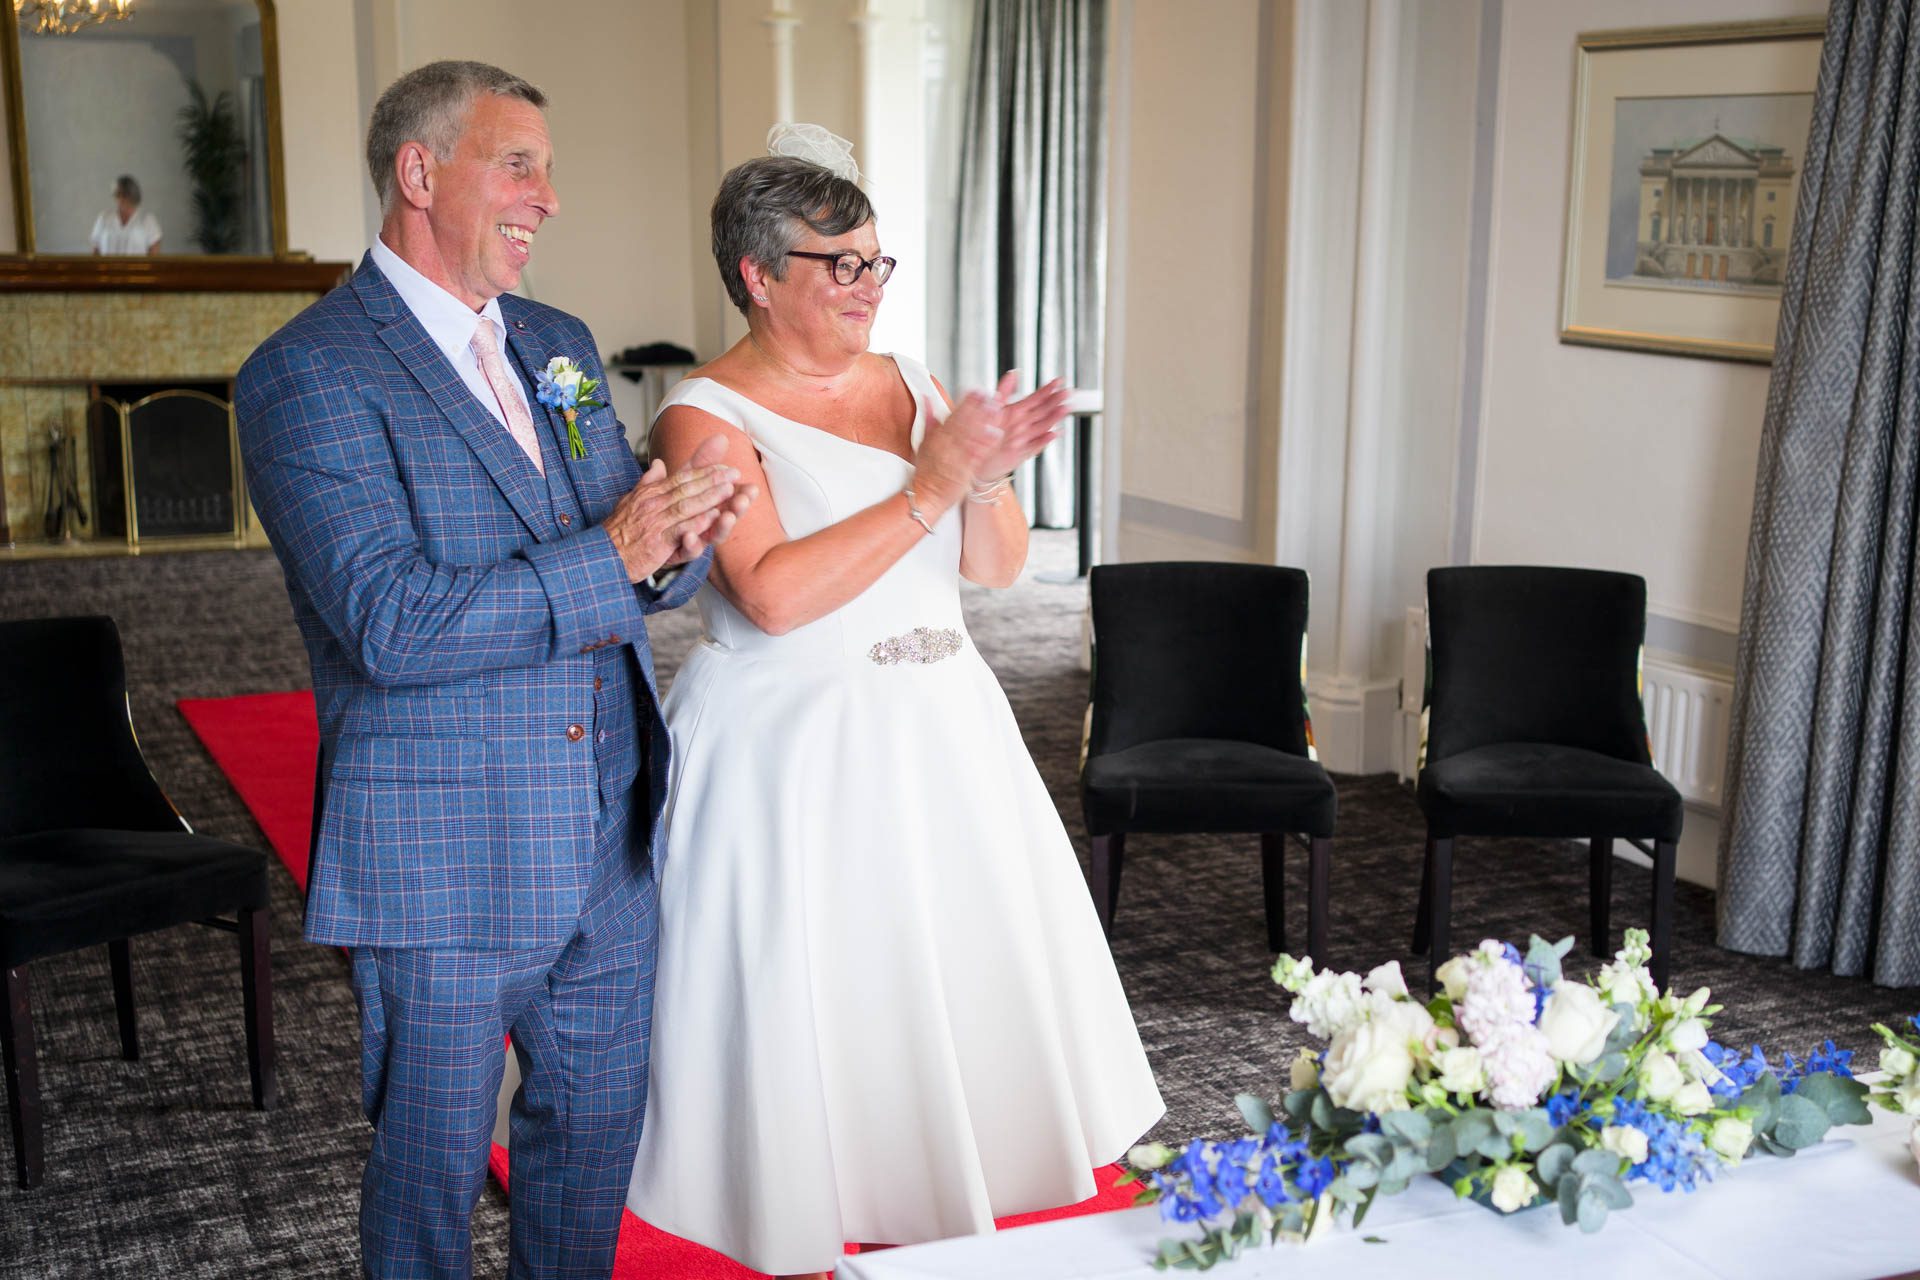 Bride and groom applaud their guest that made the reading 